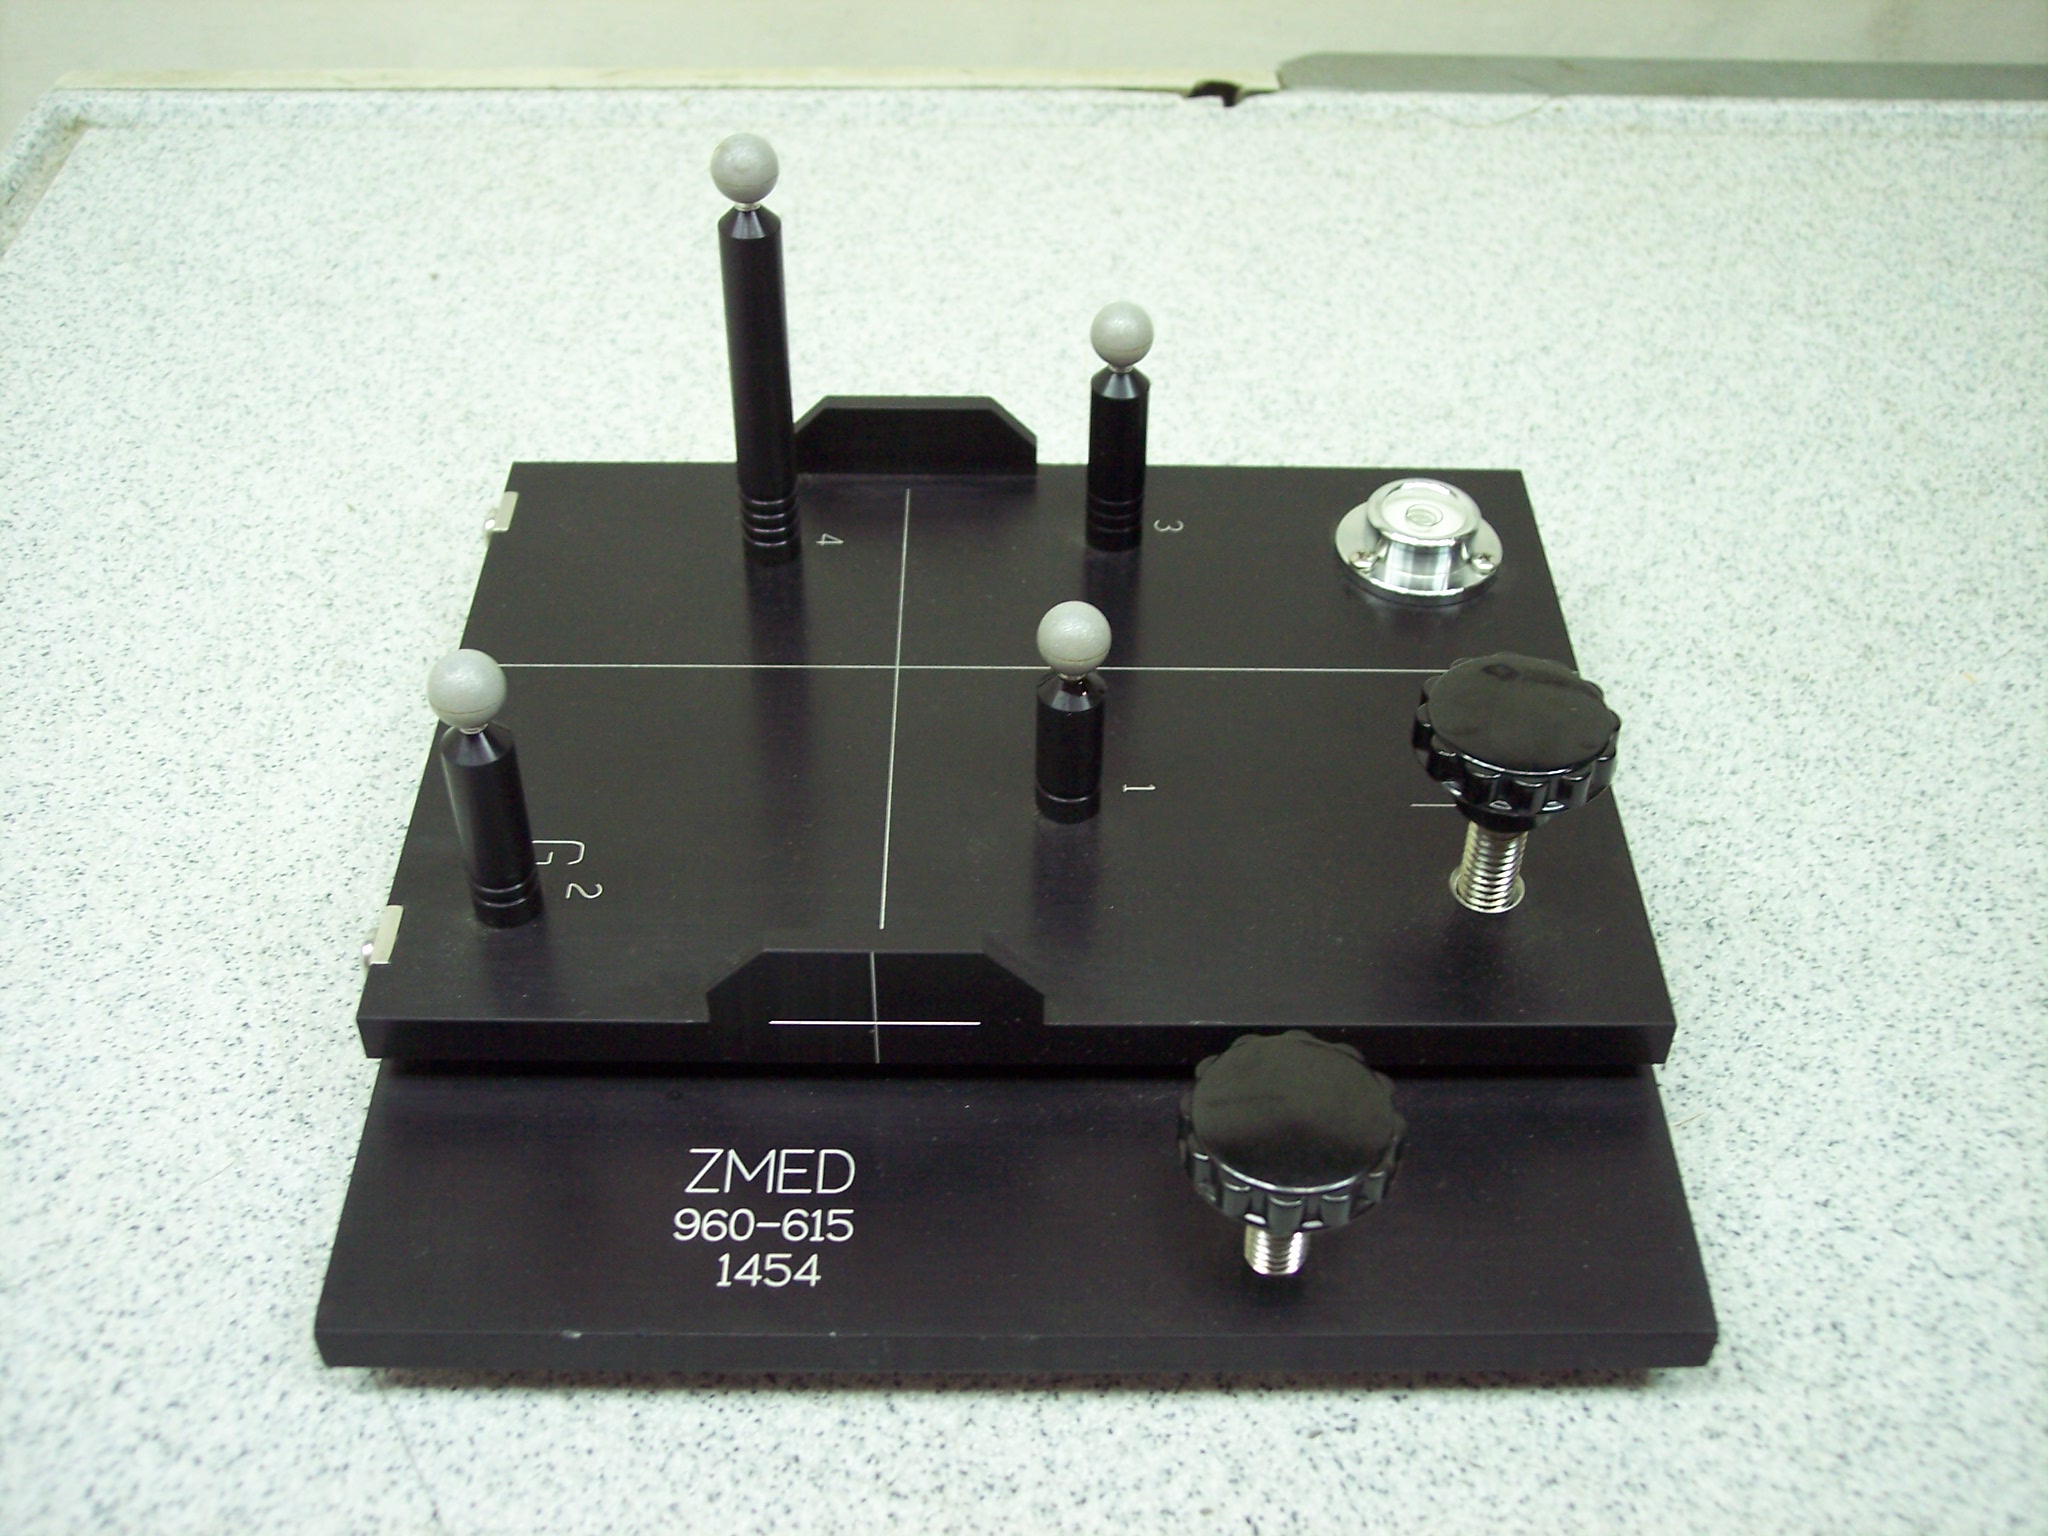 ZMED 960-615 Table Top Calibration Jig